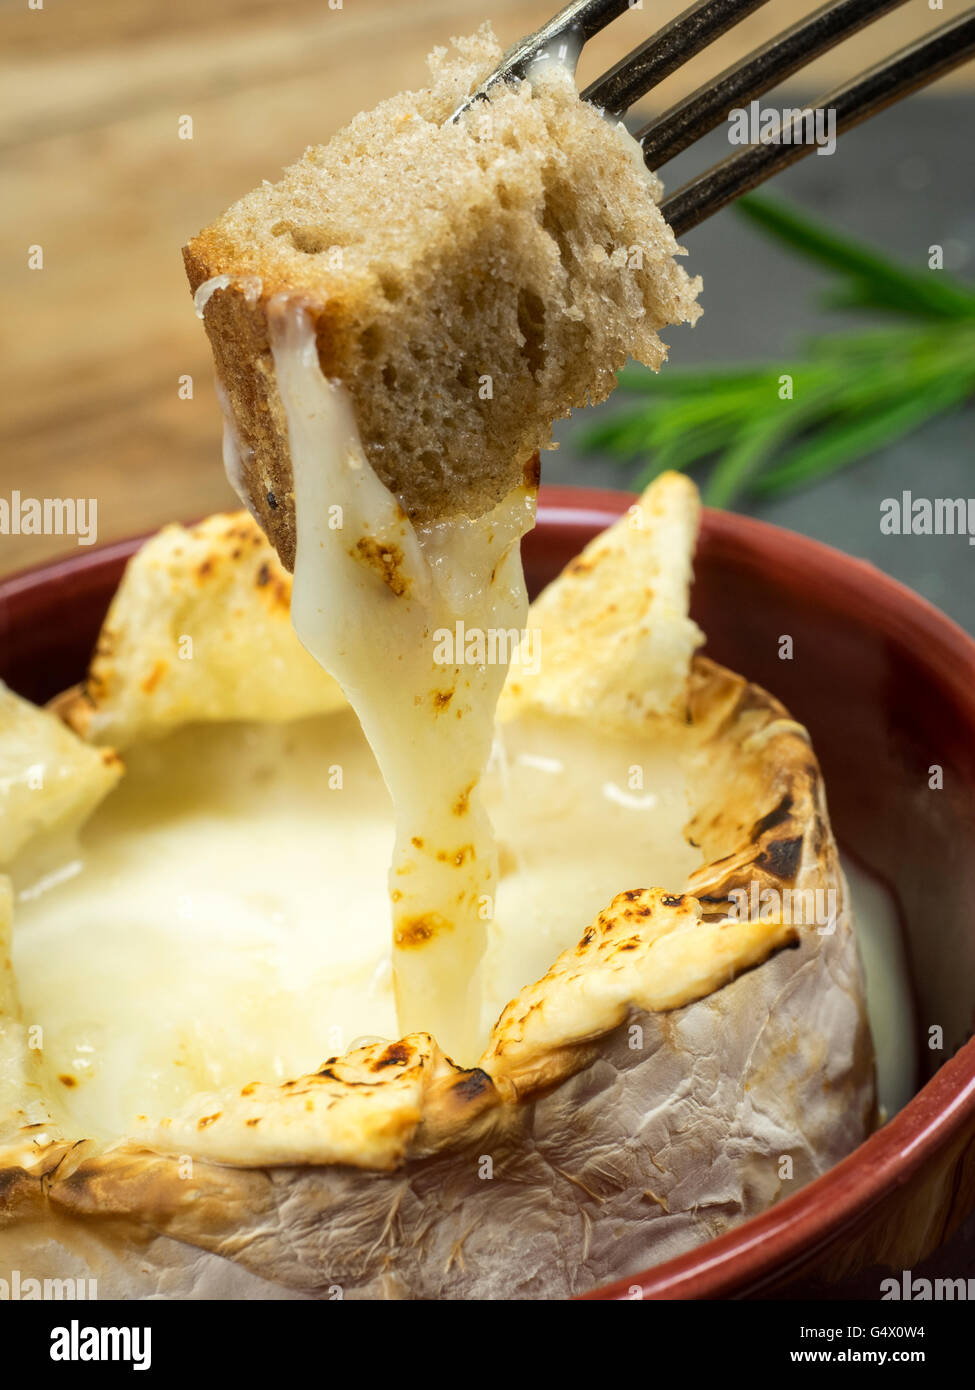 Baked Camembert made from goat cheese with bread cubes Stock Photo